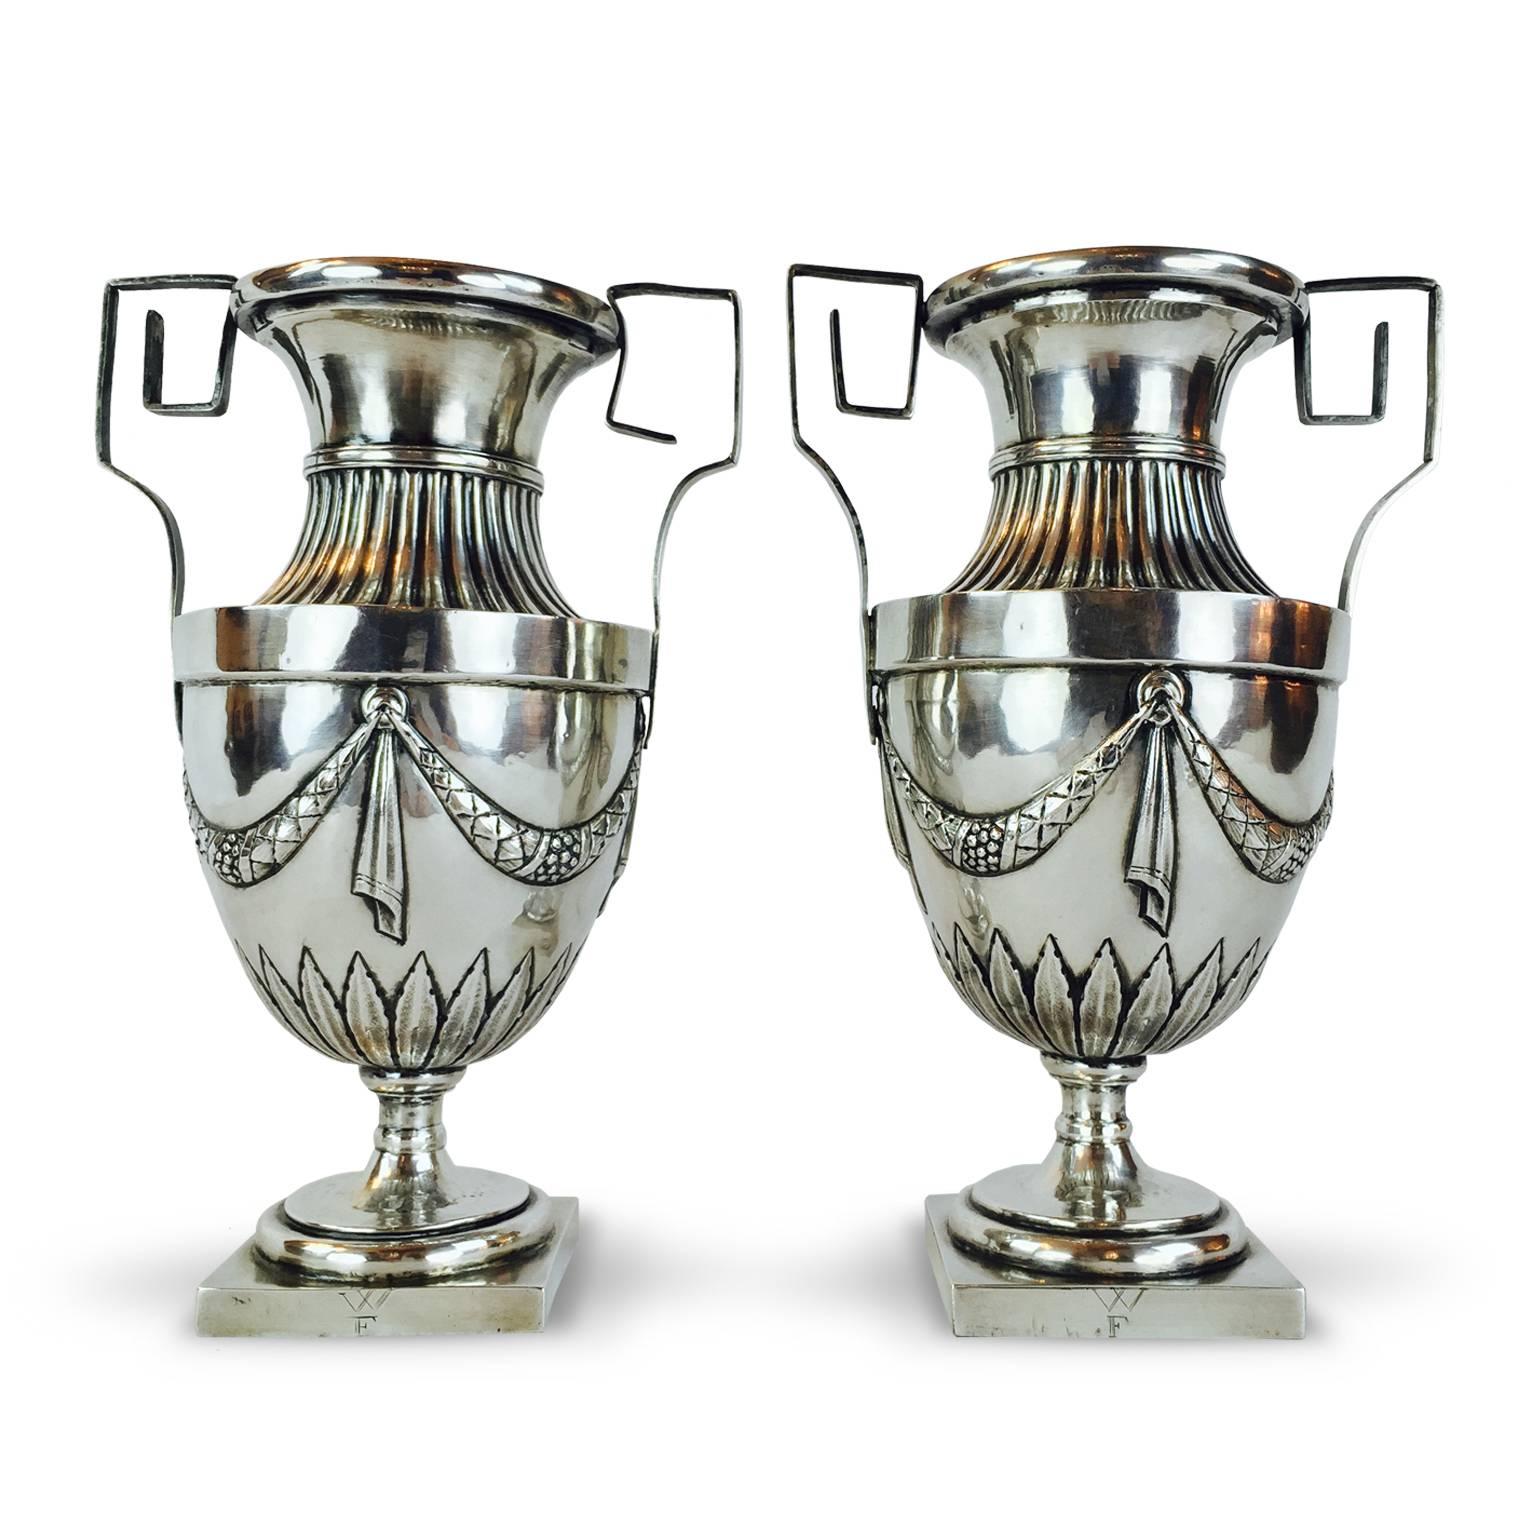 A rare pair of antique Louis XVI embossed silver vases with geometric handles made by Italian silvermaker Paolo Ruzzoli, as Grand Tour souvenir, memento for the Elite travellers.
The square base is engraved with W F initials, may be related to the